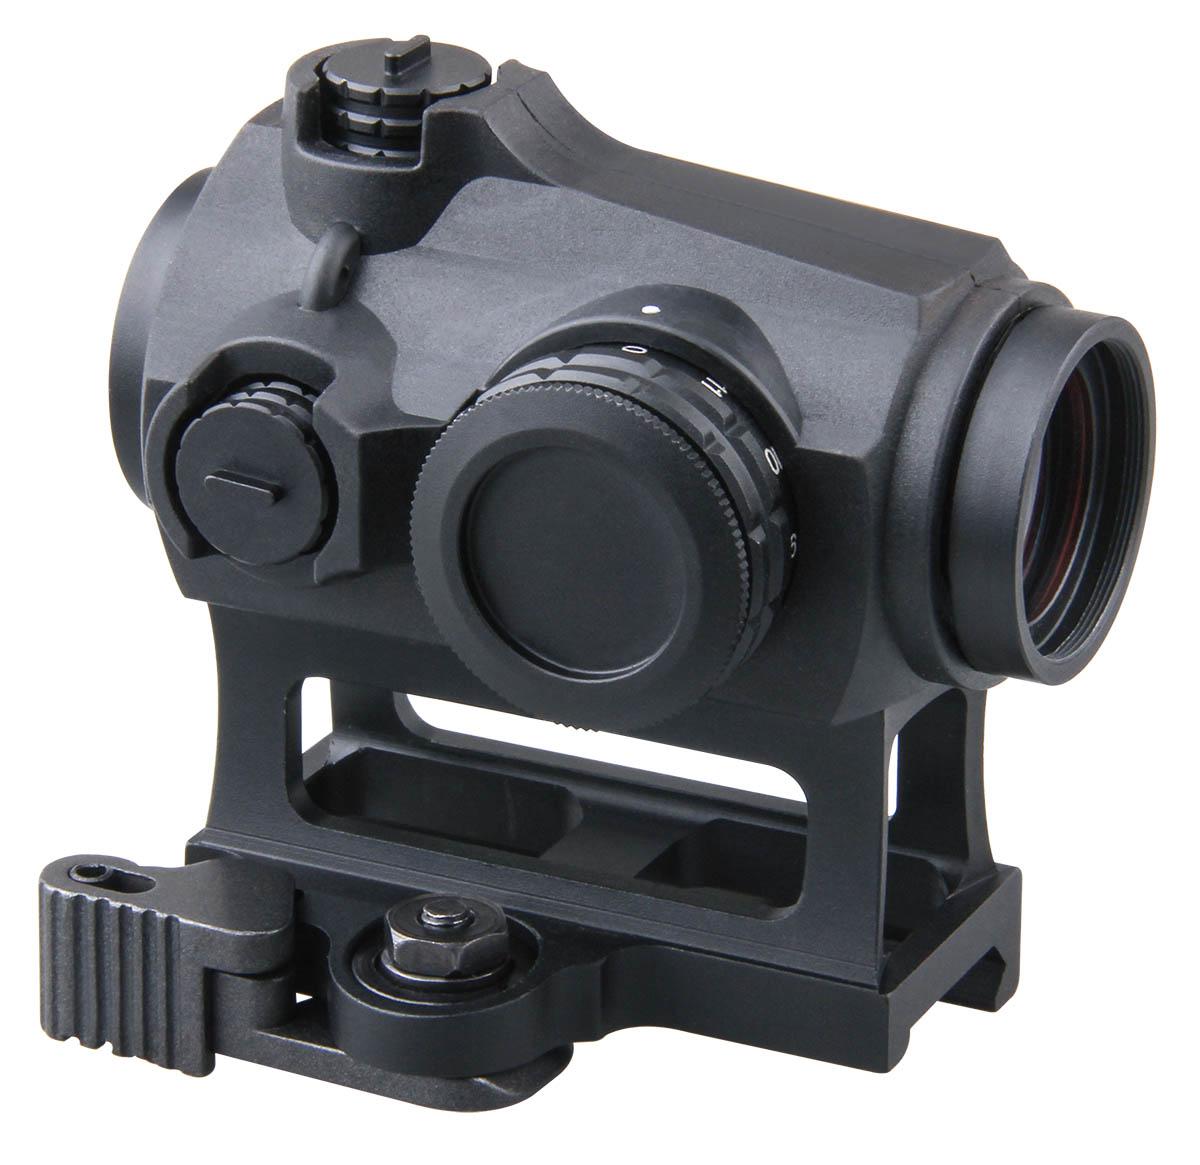 TAC Vector Optics Maverick 1x22 T-1 Tactical Compact Red Dot Sight Scope with Quick Release QD Mount for Rifles Handguns Airsoft Color Black 